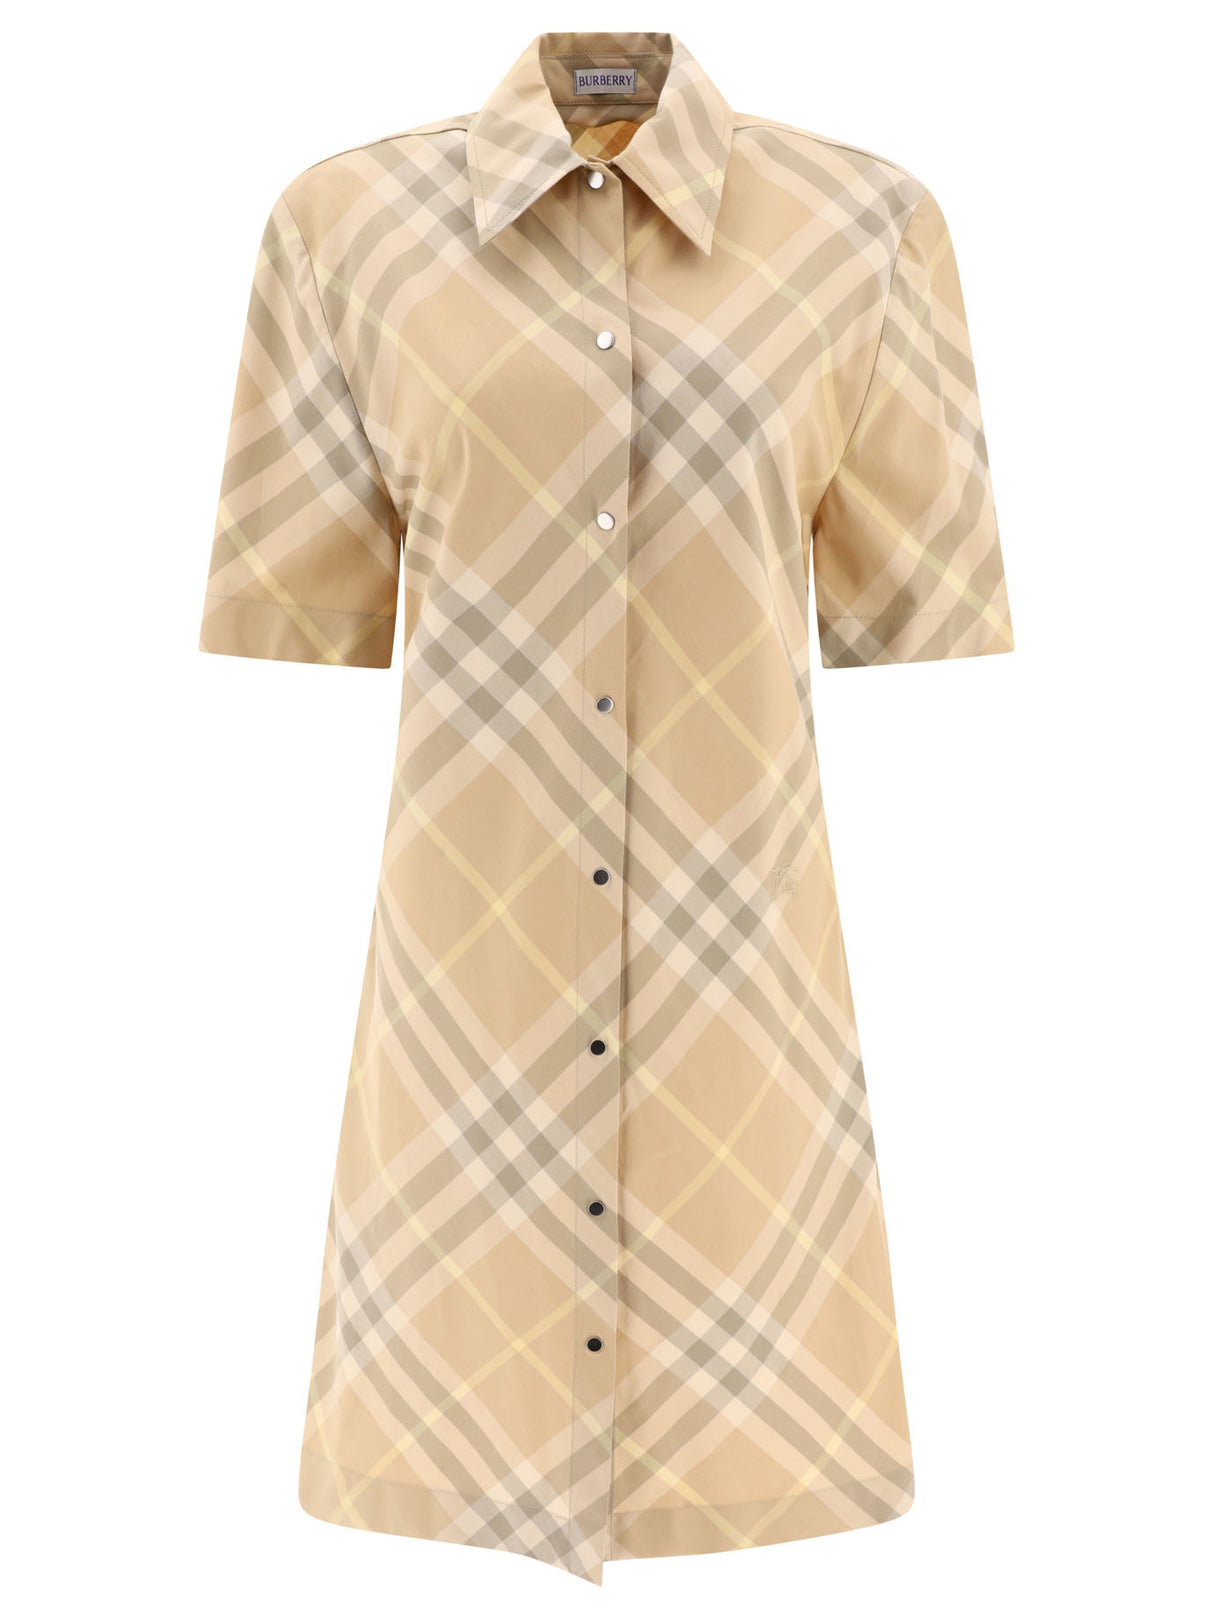 BURBERRY Checkered Cotton Shirt Dress for Women - Relaxed Fit, Press-Stud Closure, Side Pockets, Embroidered Design